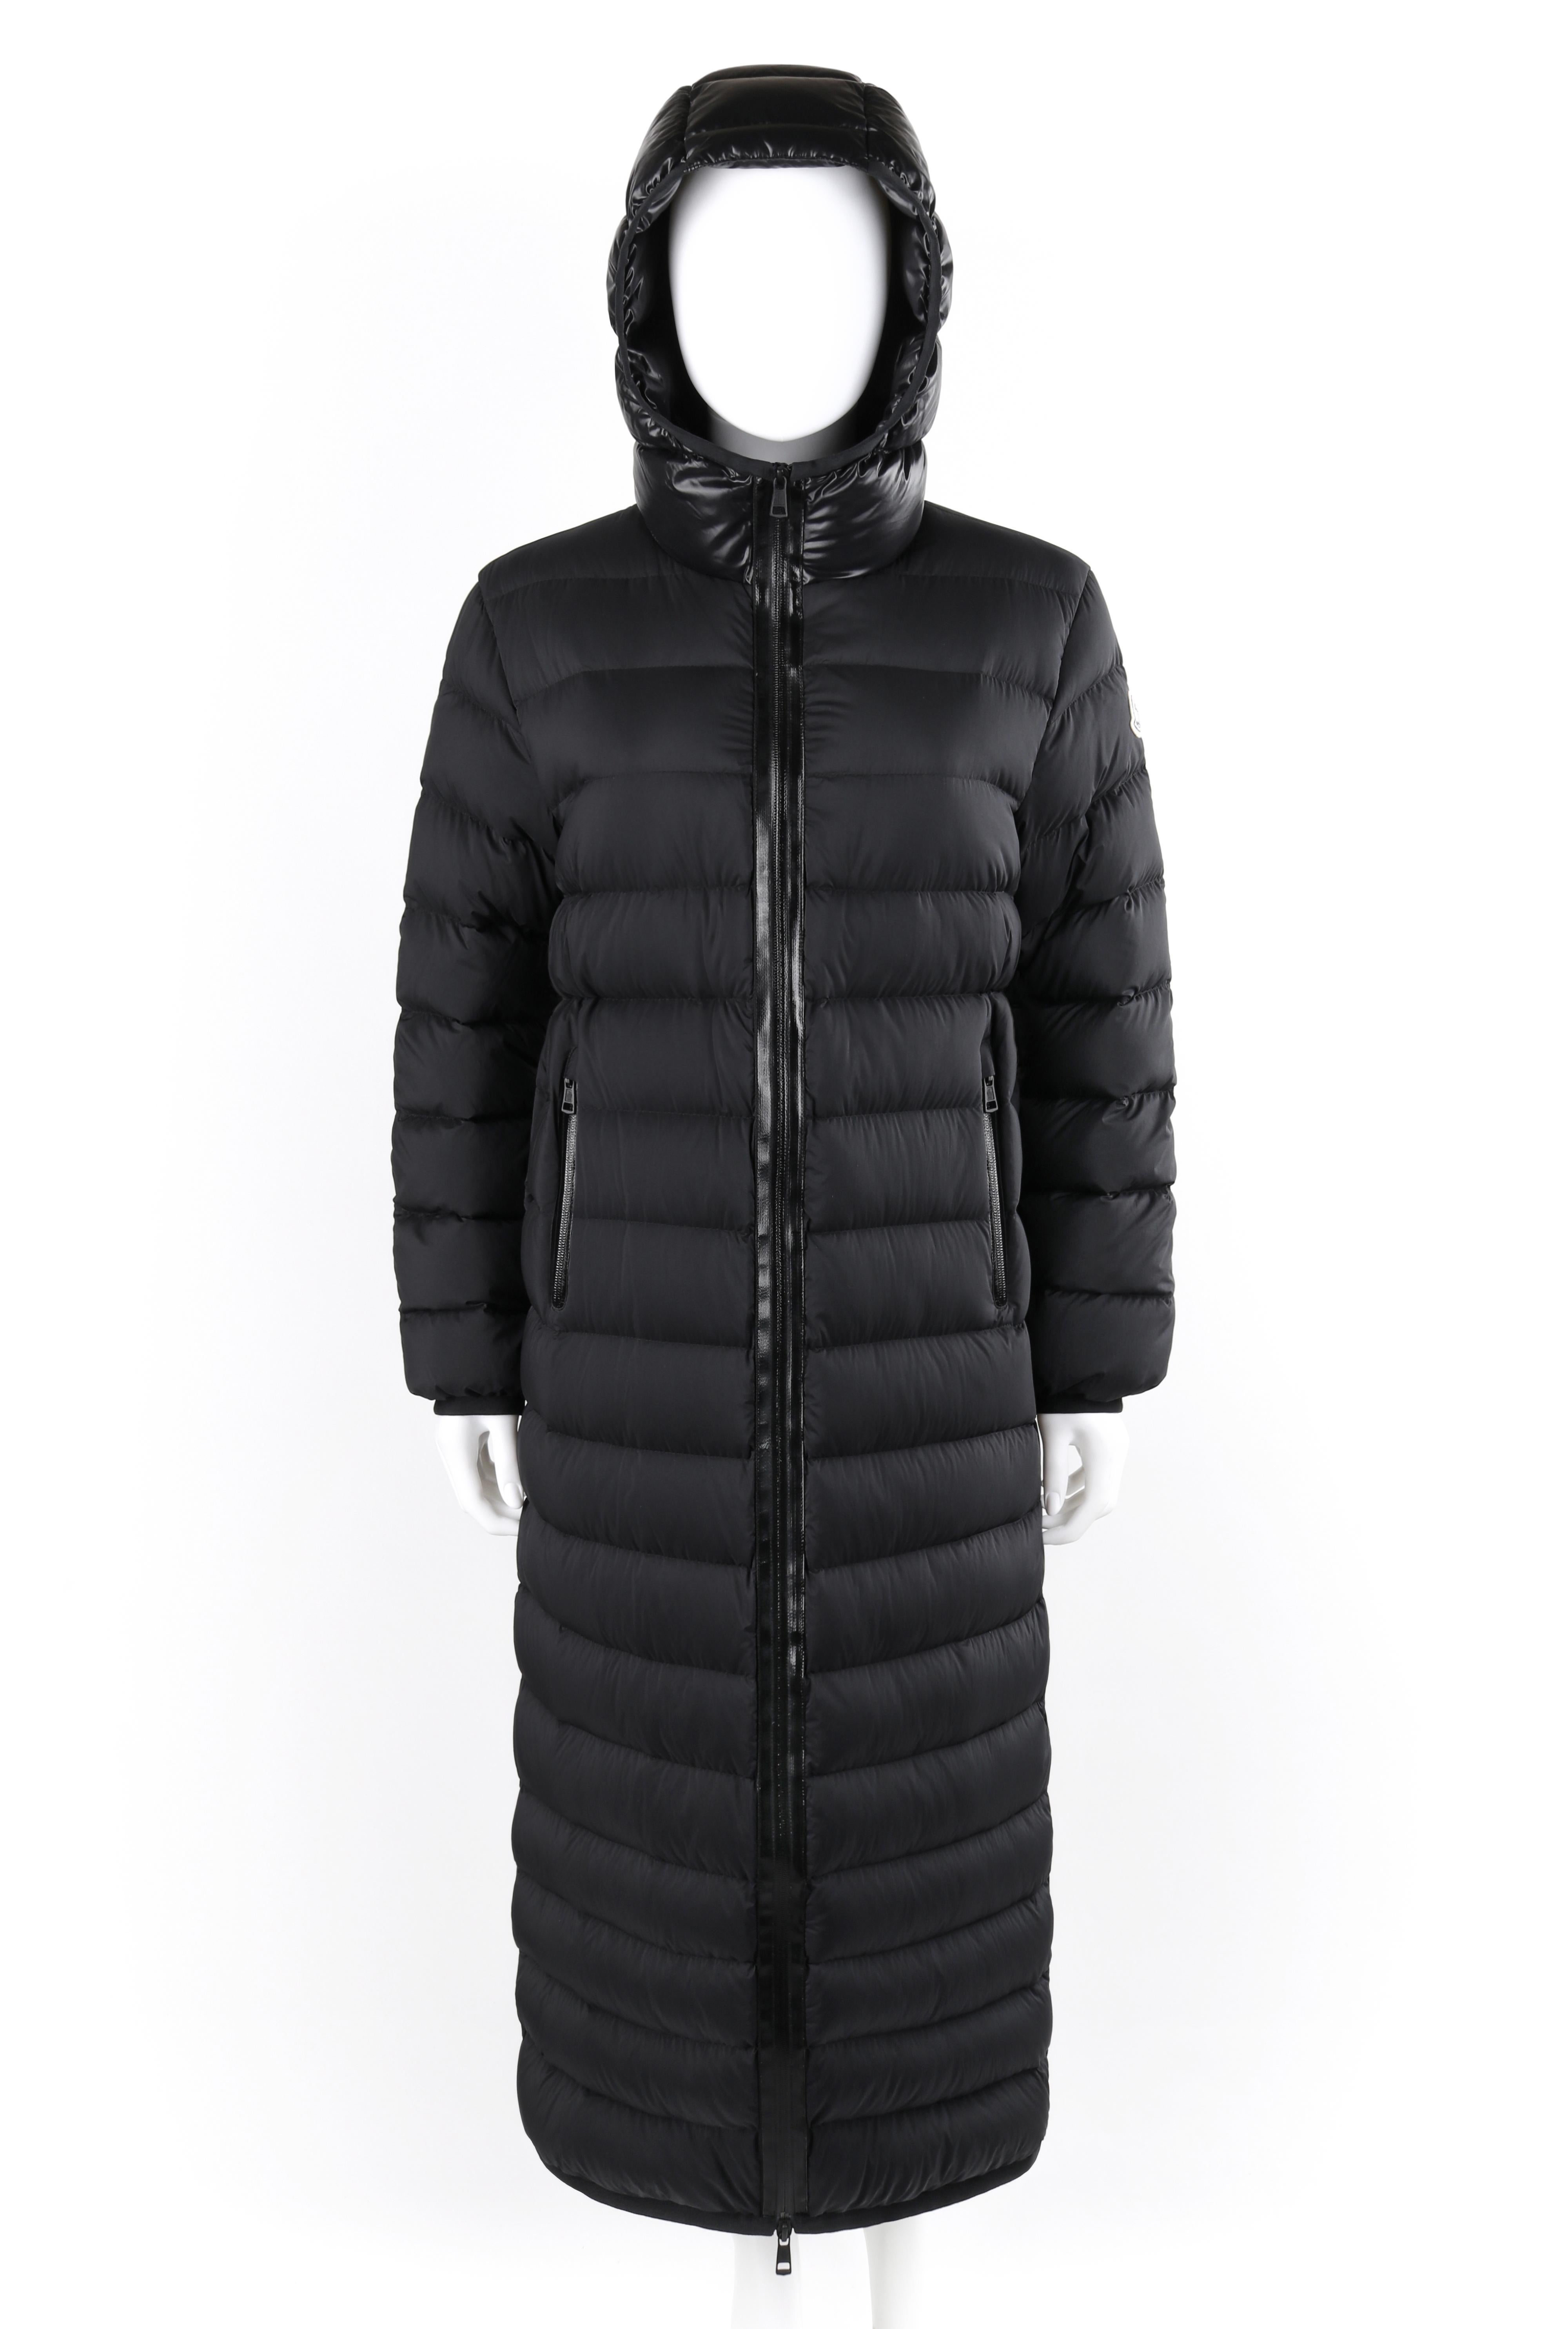 MONCLER F/W 2018 “Grue” Black Hooded Quilted Long Down Puffer Coat Jacket NWT
 
Brand / Manufacturer: Moncler
Collection: F/W 2018 Moncler Pierpaolo Piccioli 
Designer: Pierpaolo Piccioli 
Manufacturer Style Name: “Grue Long Down Puffer Coat”
Style: